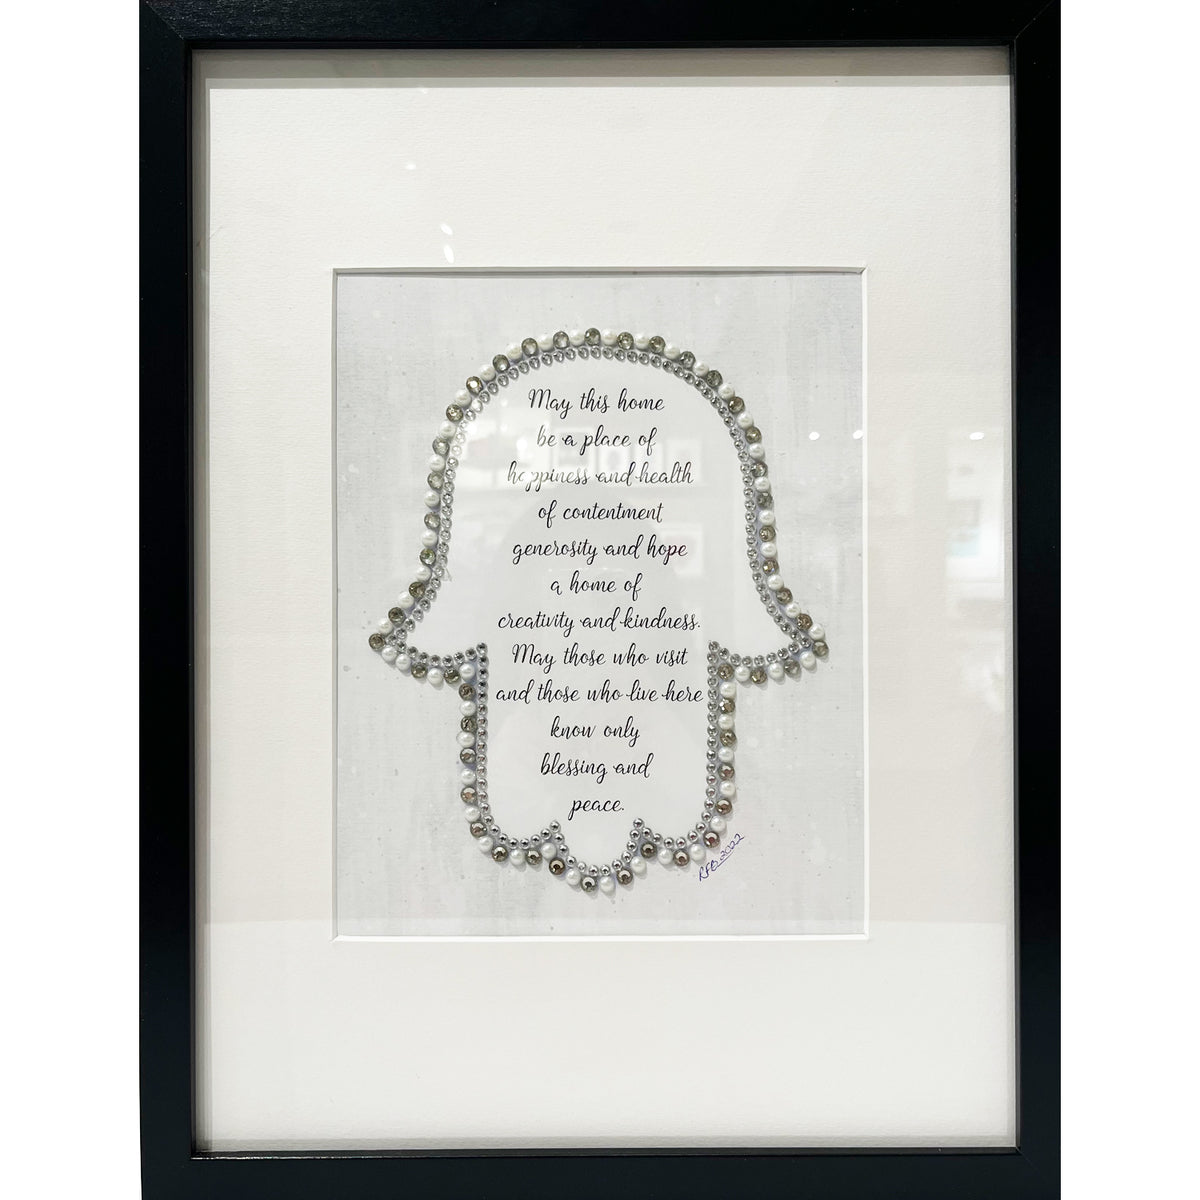 Rhonda Brewes - Large Crystal & Pearl Home Blessing, 17" x 13"